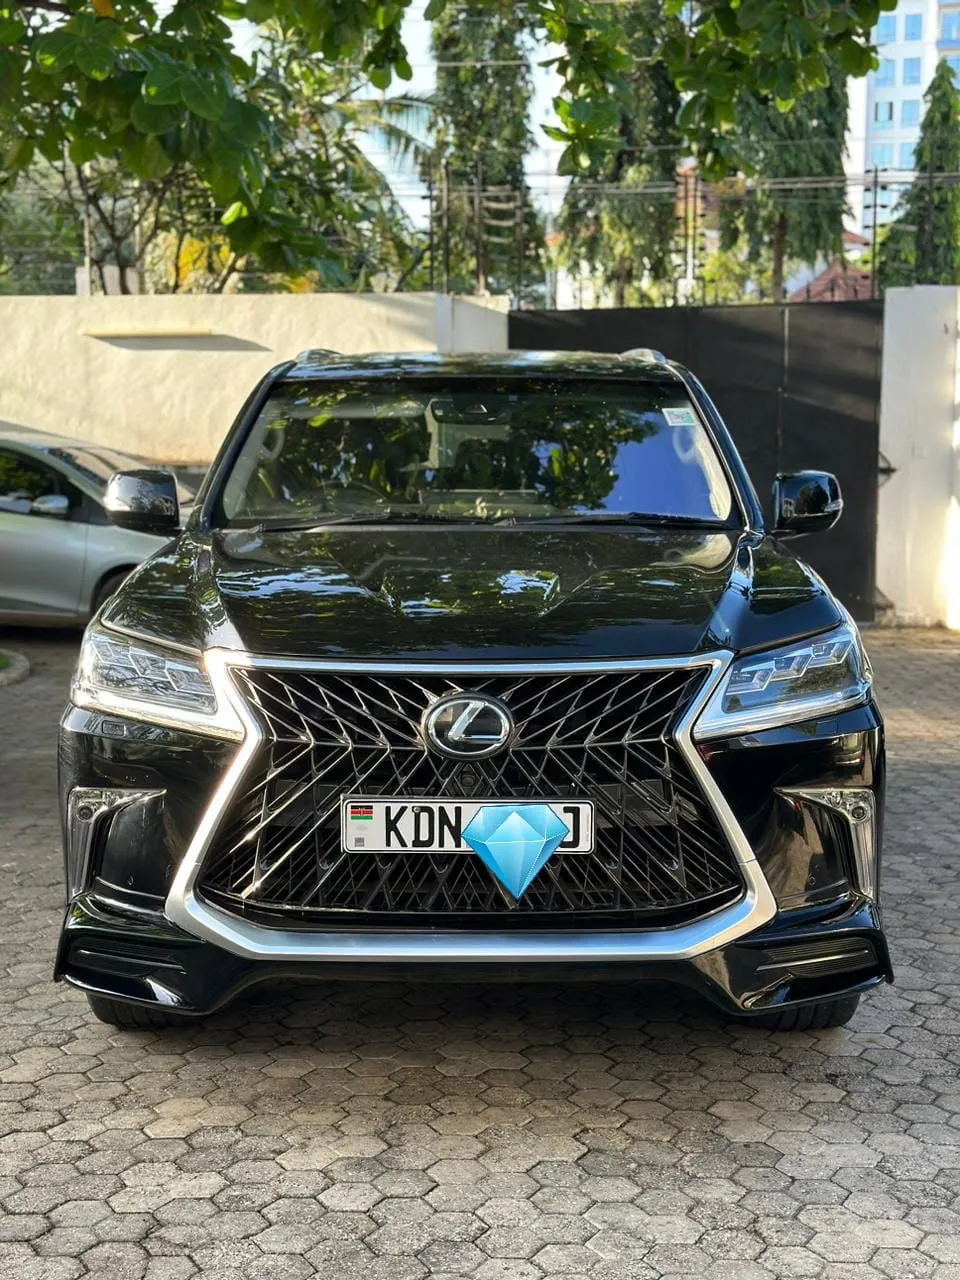 LEXUS LX 570 Kenya asian owners CHEAPEST 🔥 Lexus lx 570 for sale in kenya HIRE PURCHASE installments OK EXCLUSIVE For SALE in Kenya